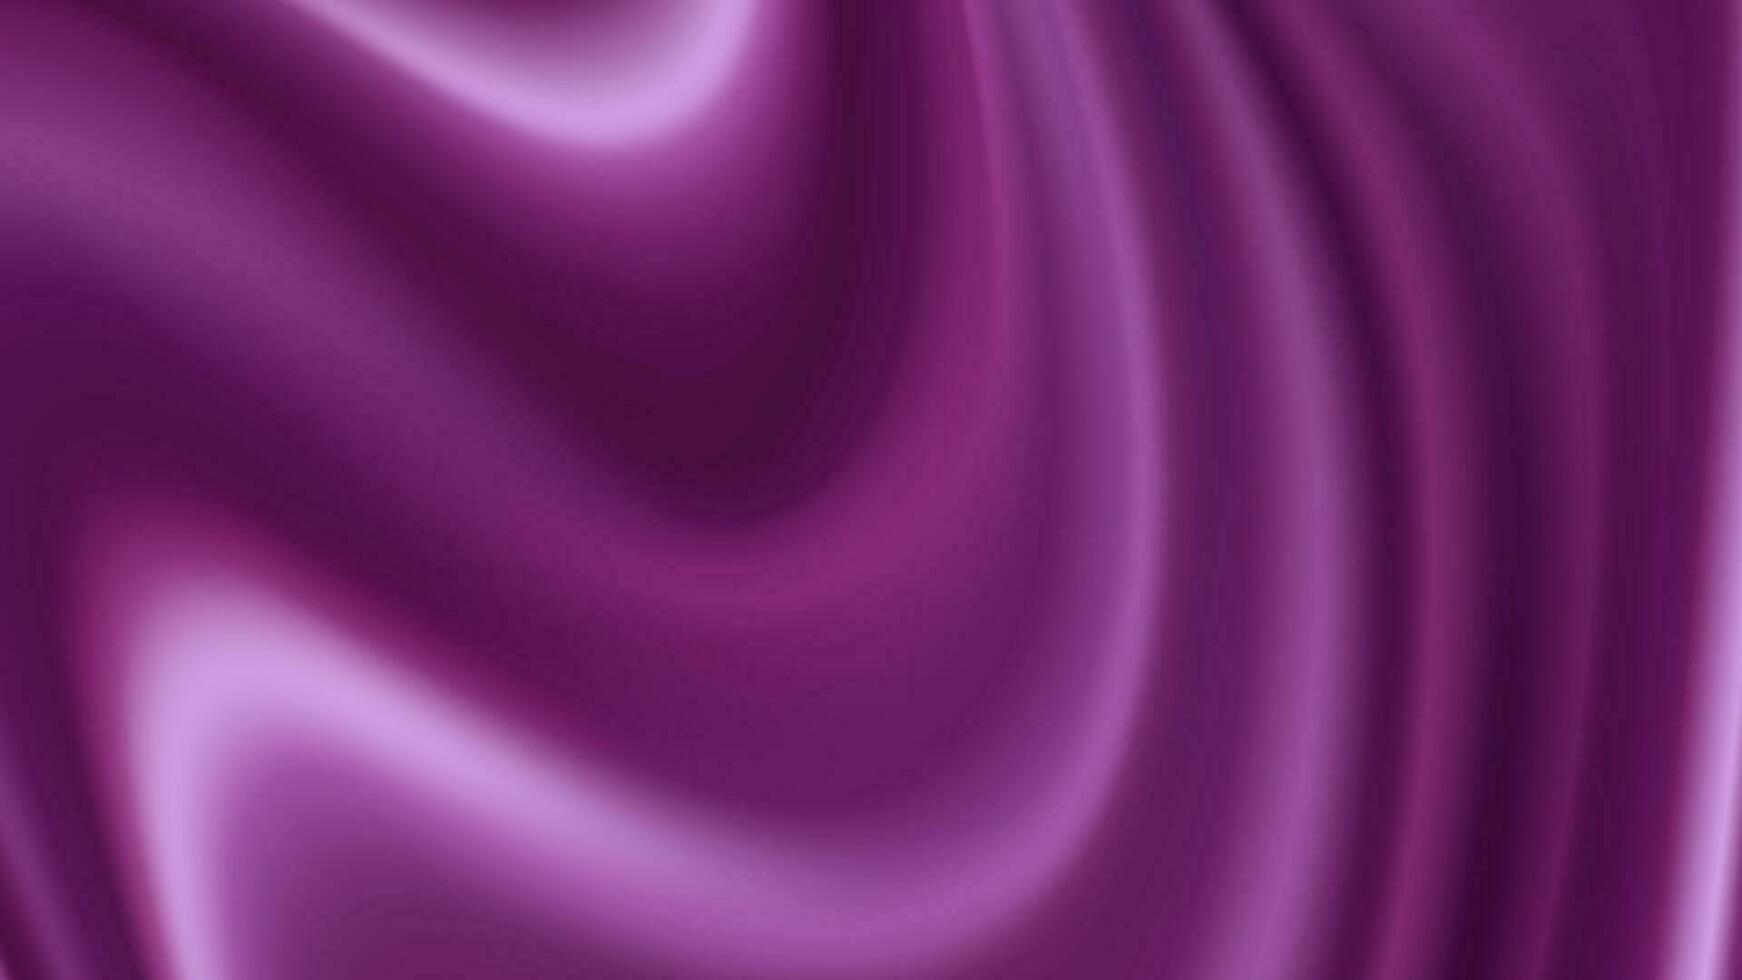 abstract background luxury purple cloth or liquid wave or wavy folds of grunge silk texture satin velvet background vector